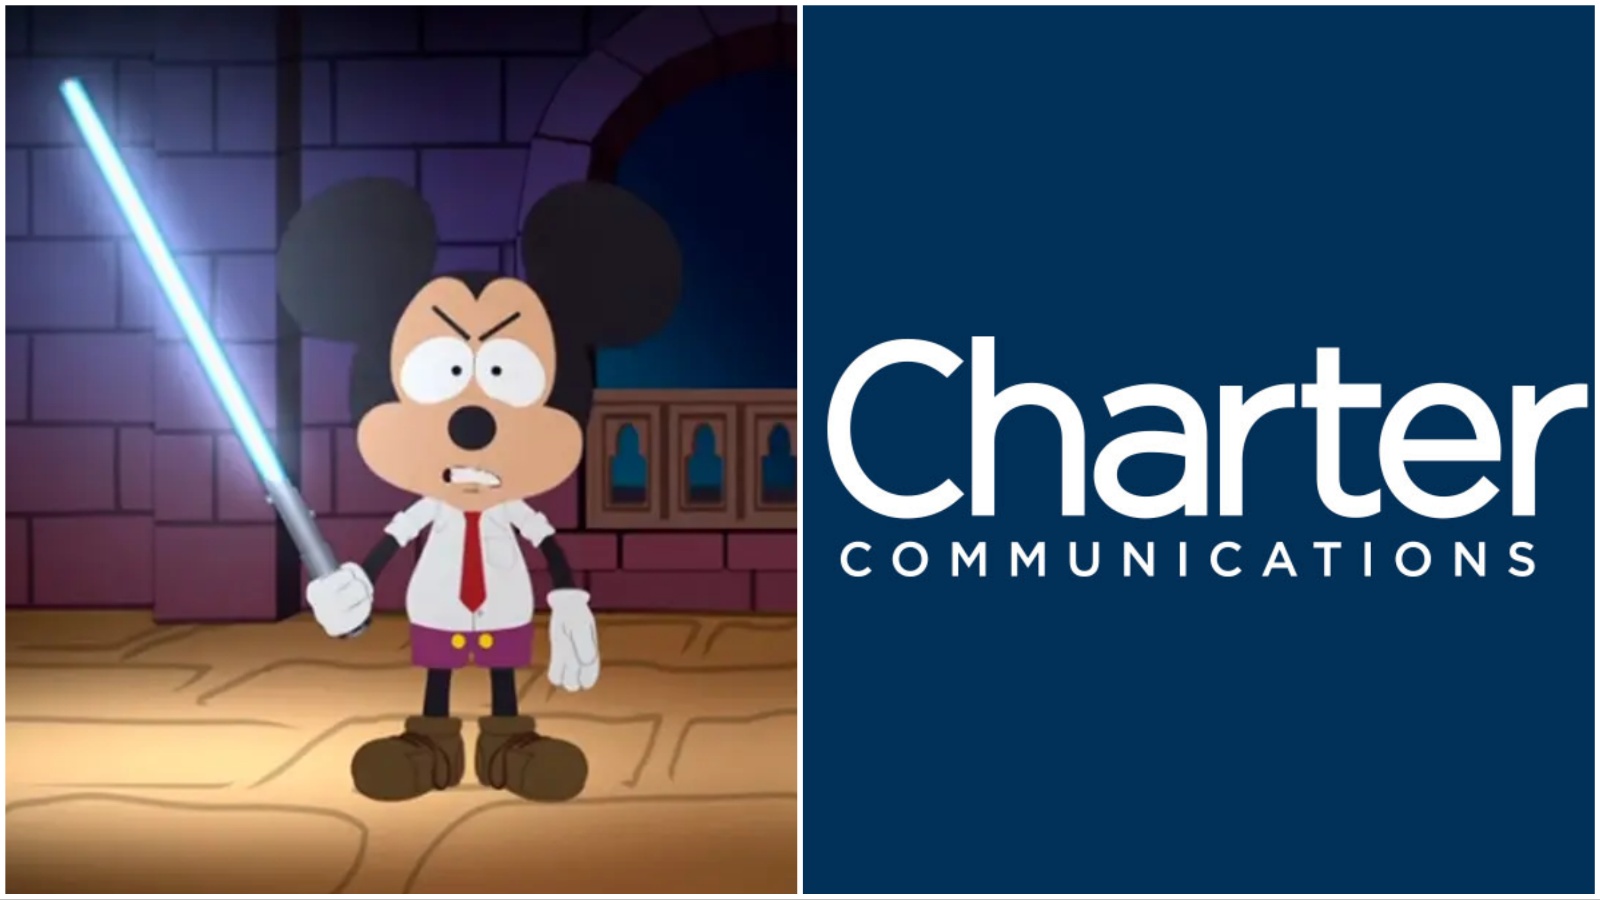 The Mickey Mouse Clubhouse: The Sequal, Ep. 1: Pilot, in 2023